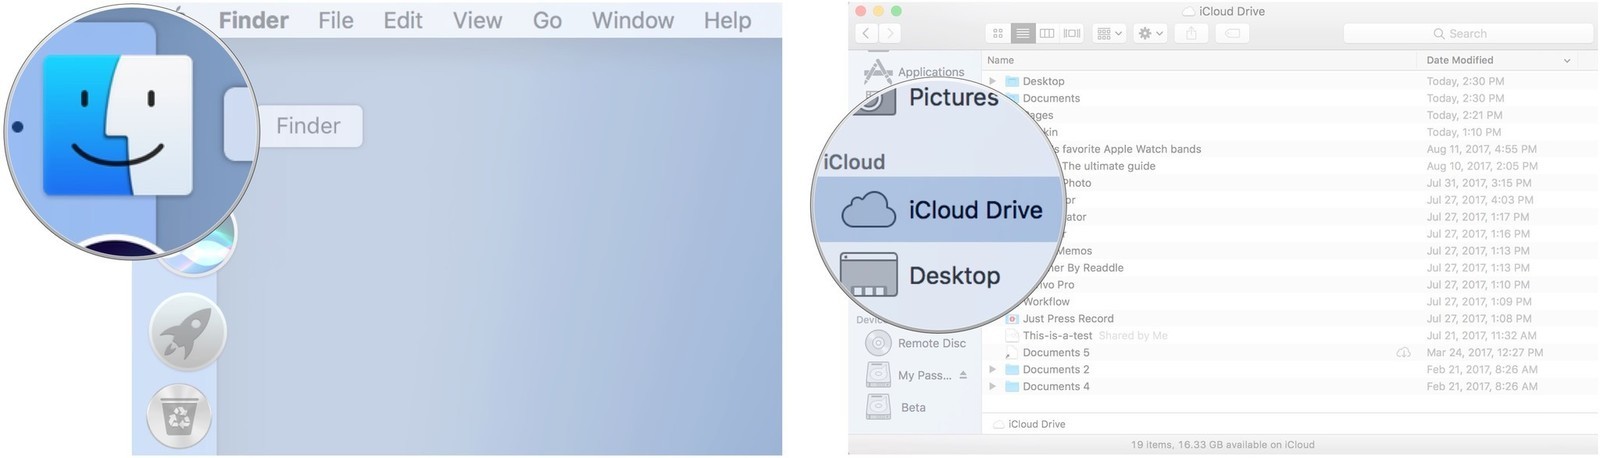 how to remove stuff from icloud storage for mac